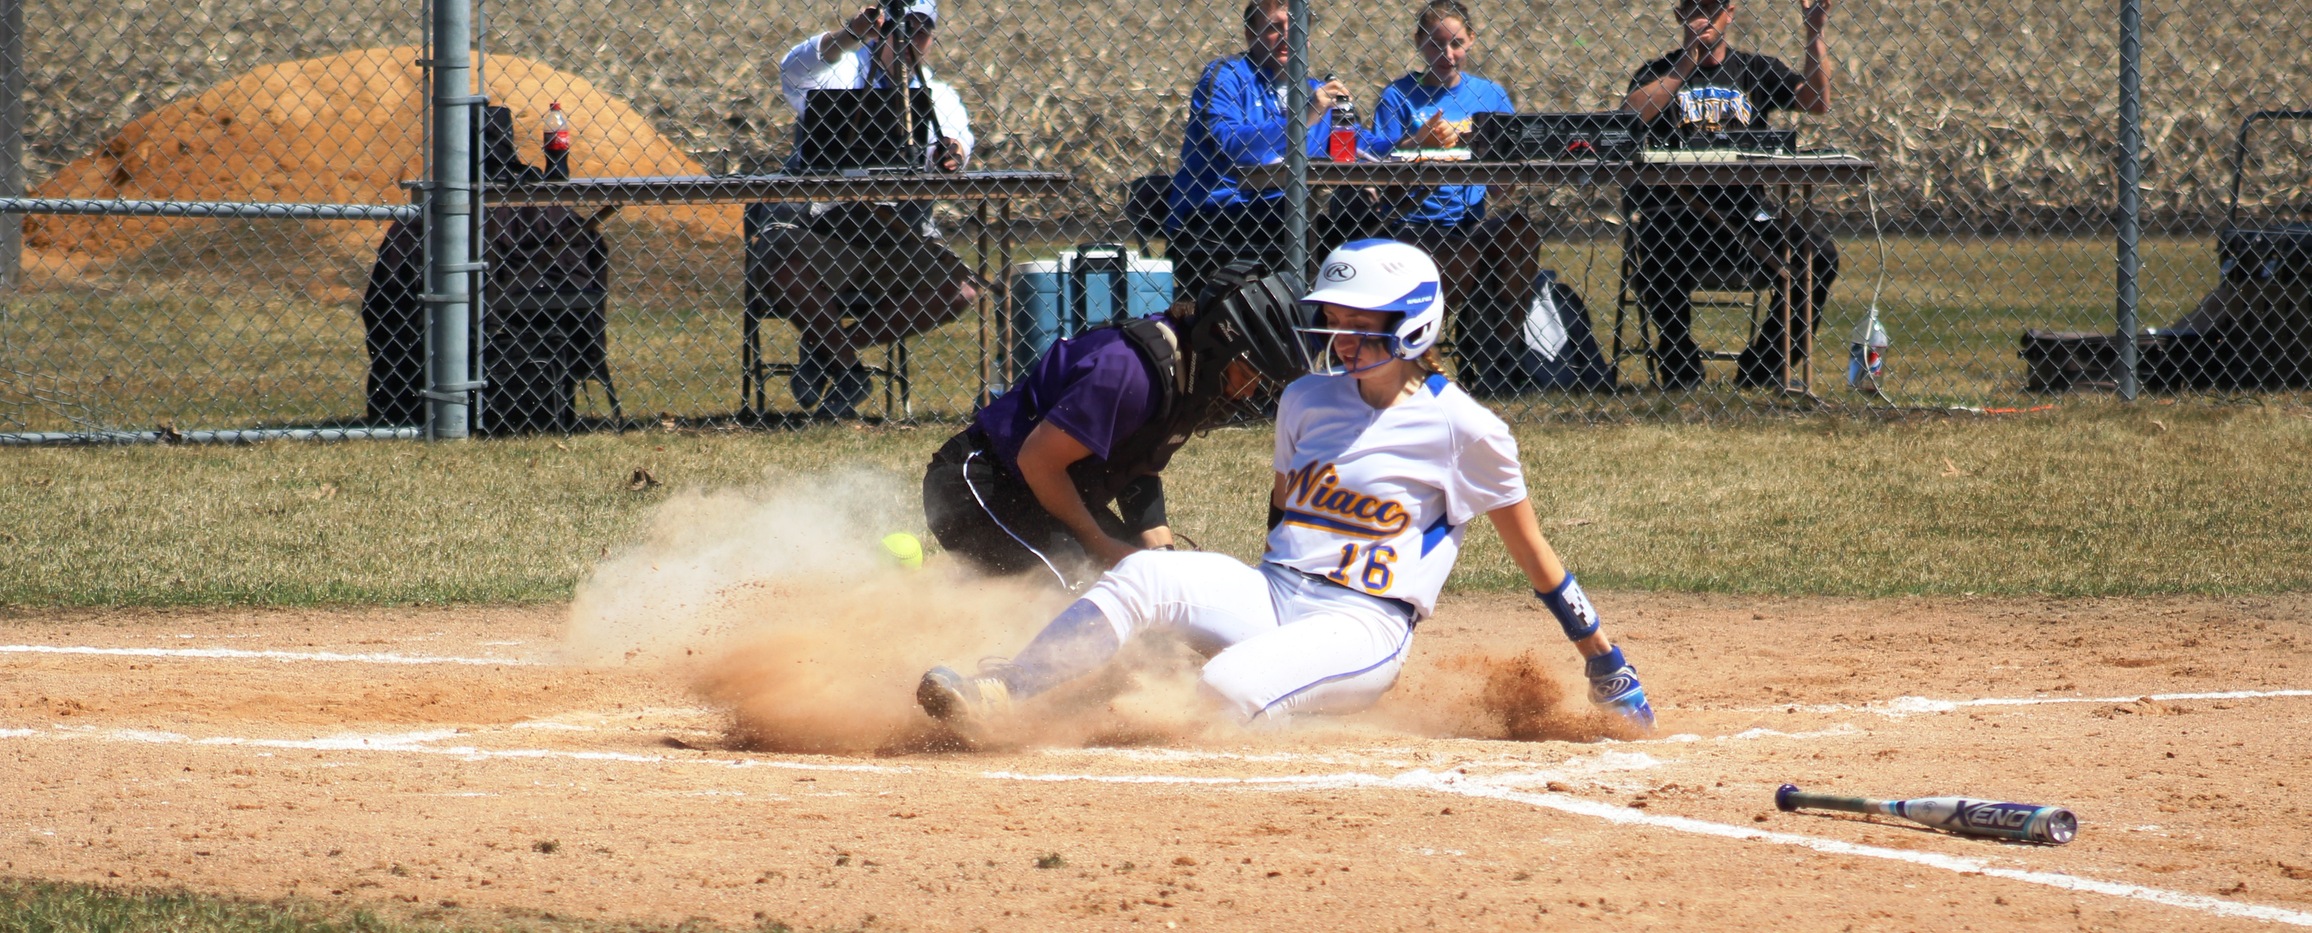 NIACC's Morgan Thesing-Ritter slides in safely at home after hitting an inside-the-park home run in the third inning of Wednesday's first game against Ellsworth.